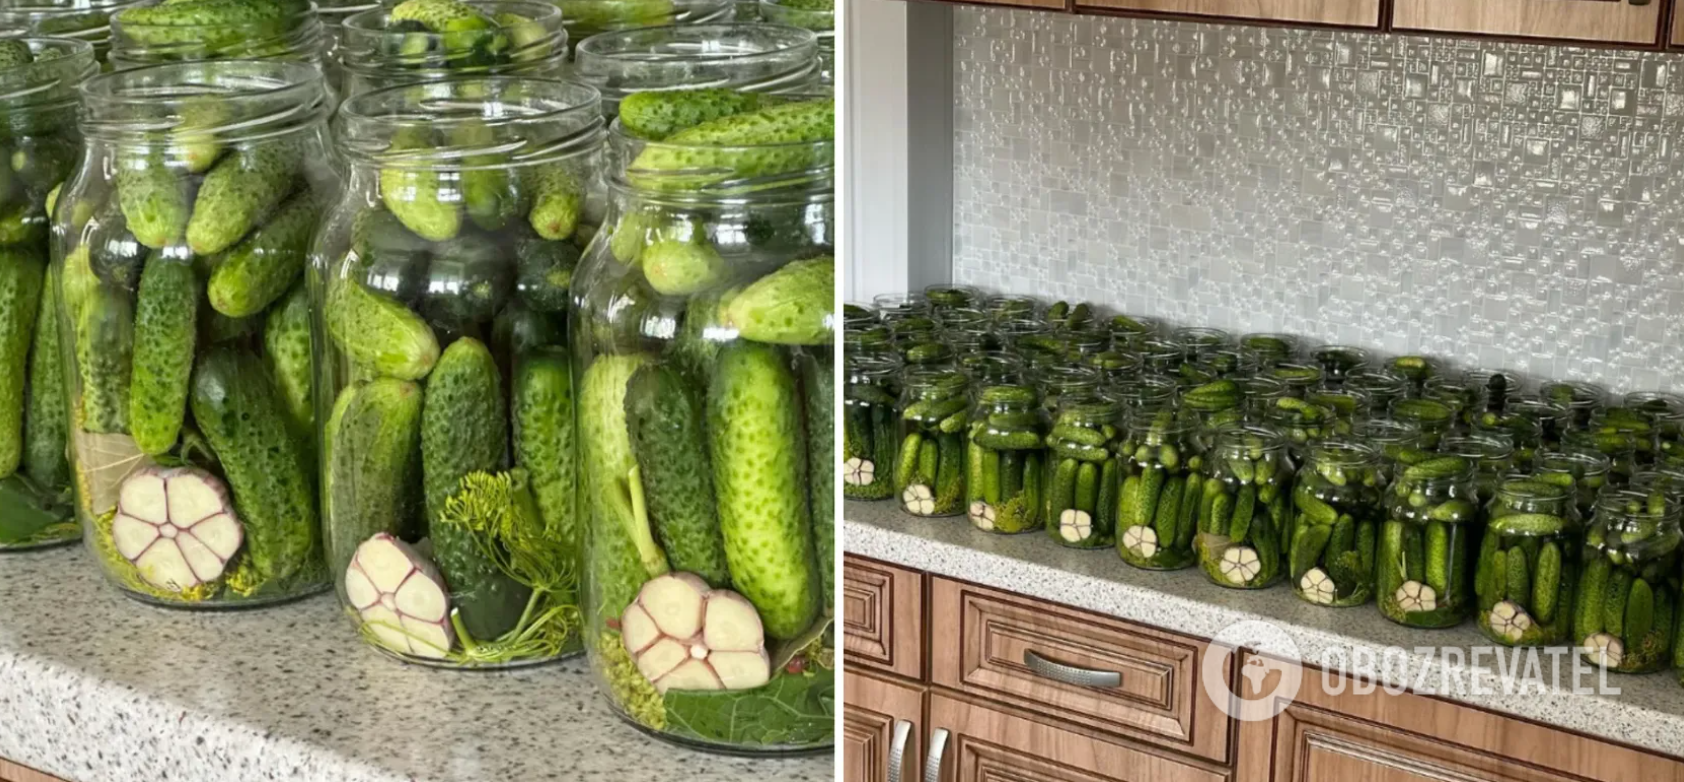 How to pickle sweet cucumbers to make them crisp and firm